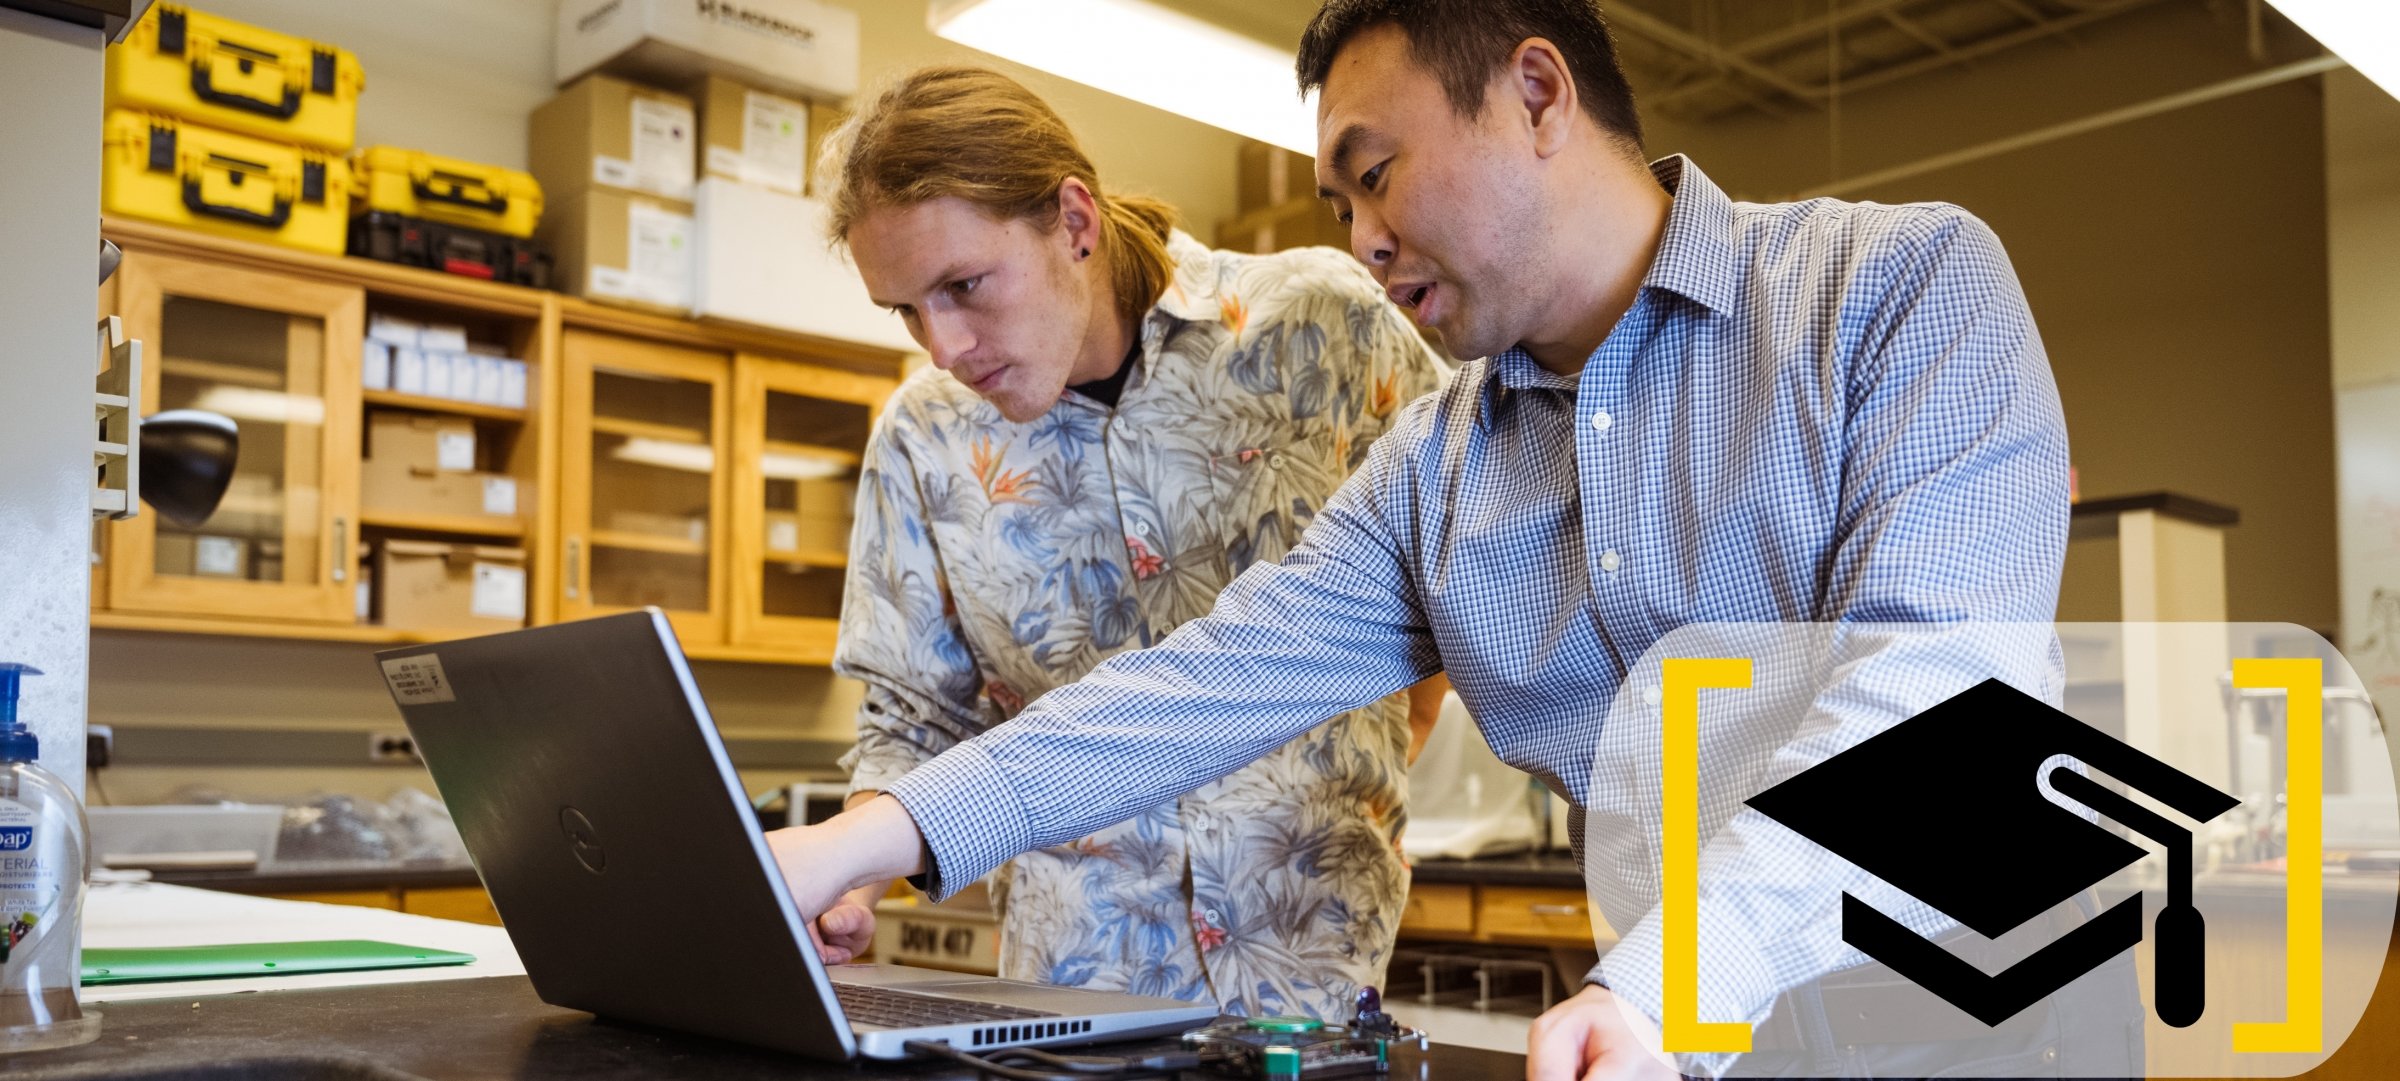 ICC member Hongyu An discusses research on a laptop in a research lab with an MTU student